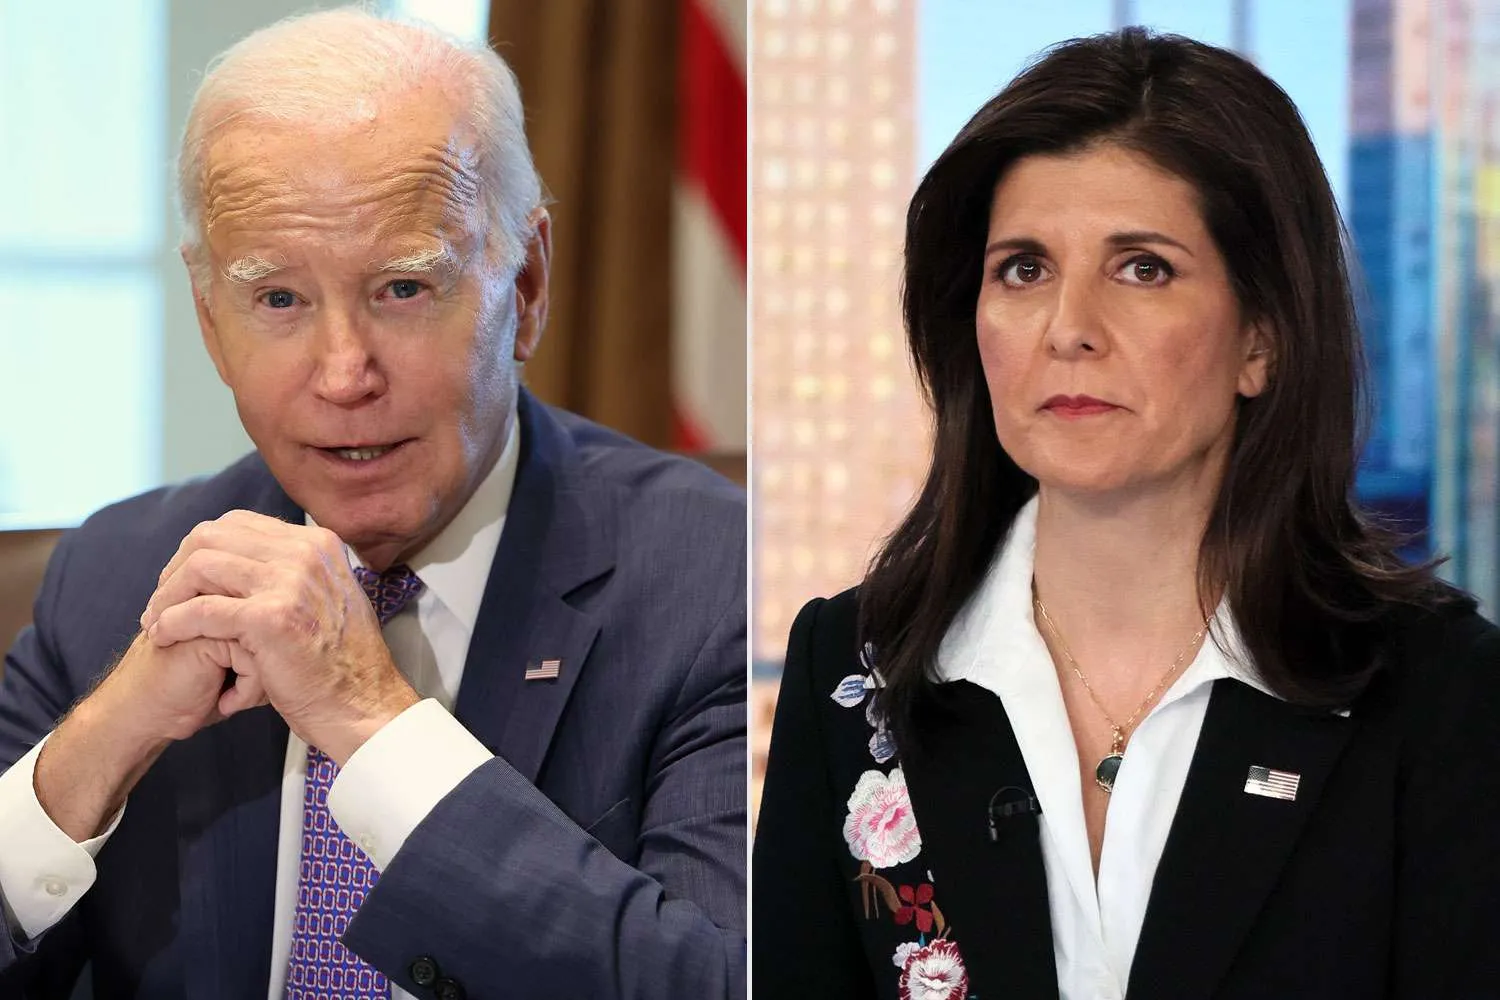 Biden Campaign Targets Nikki Haley Supporters In New Anti-Trump Ad